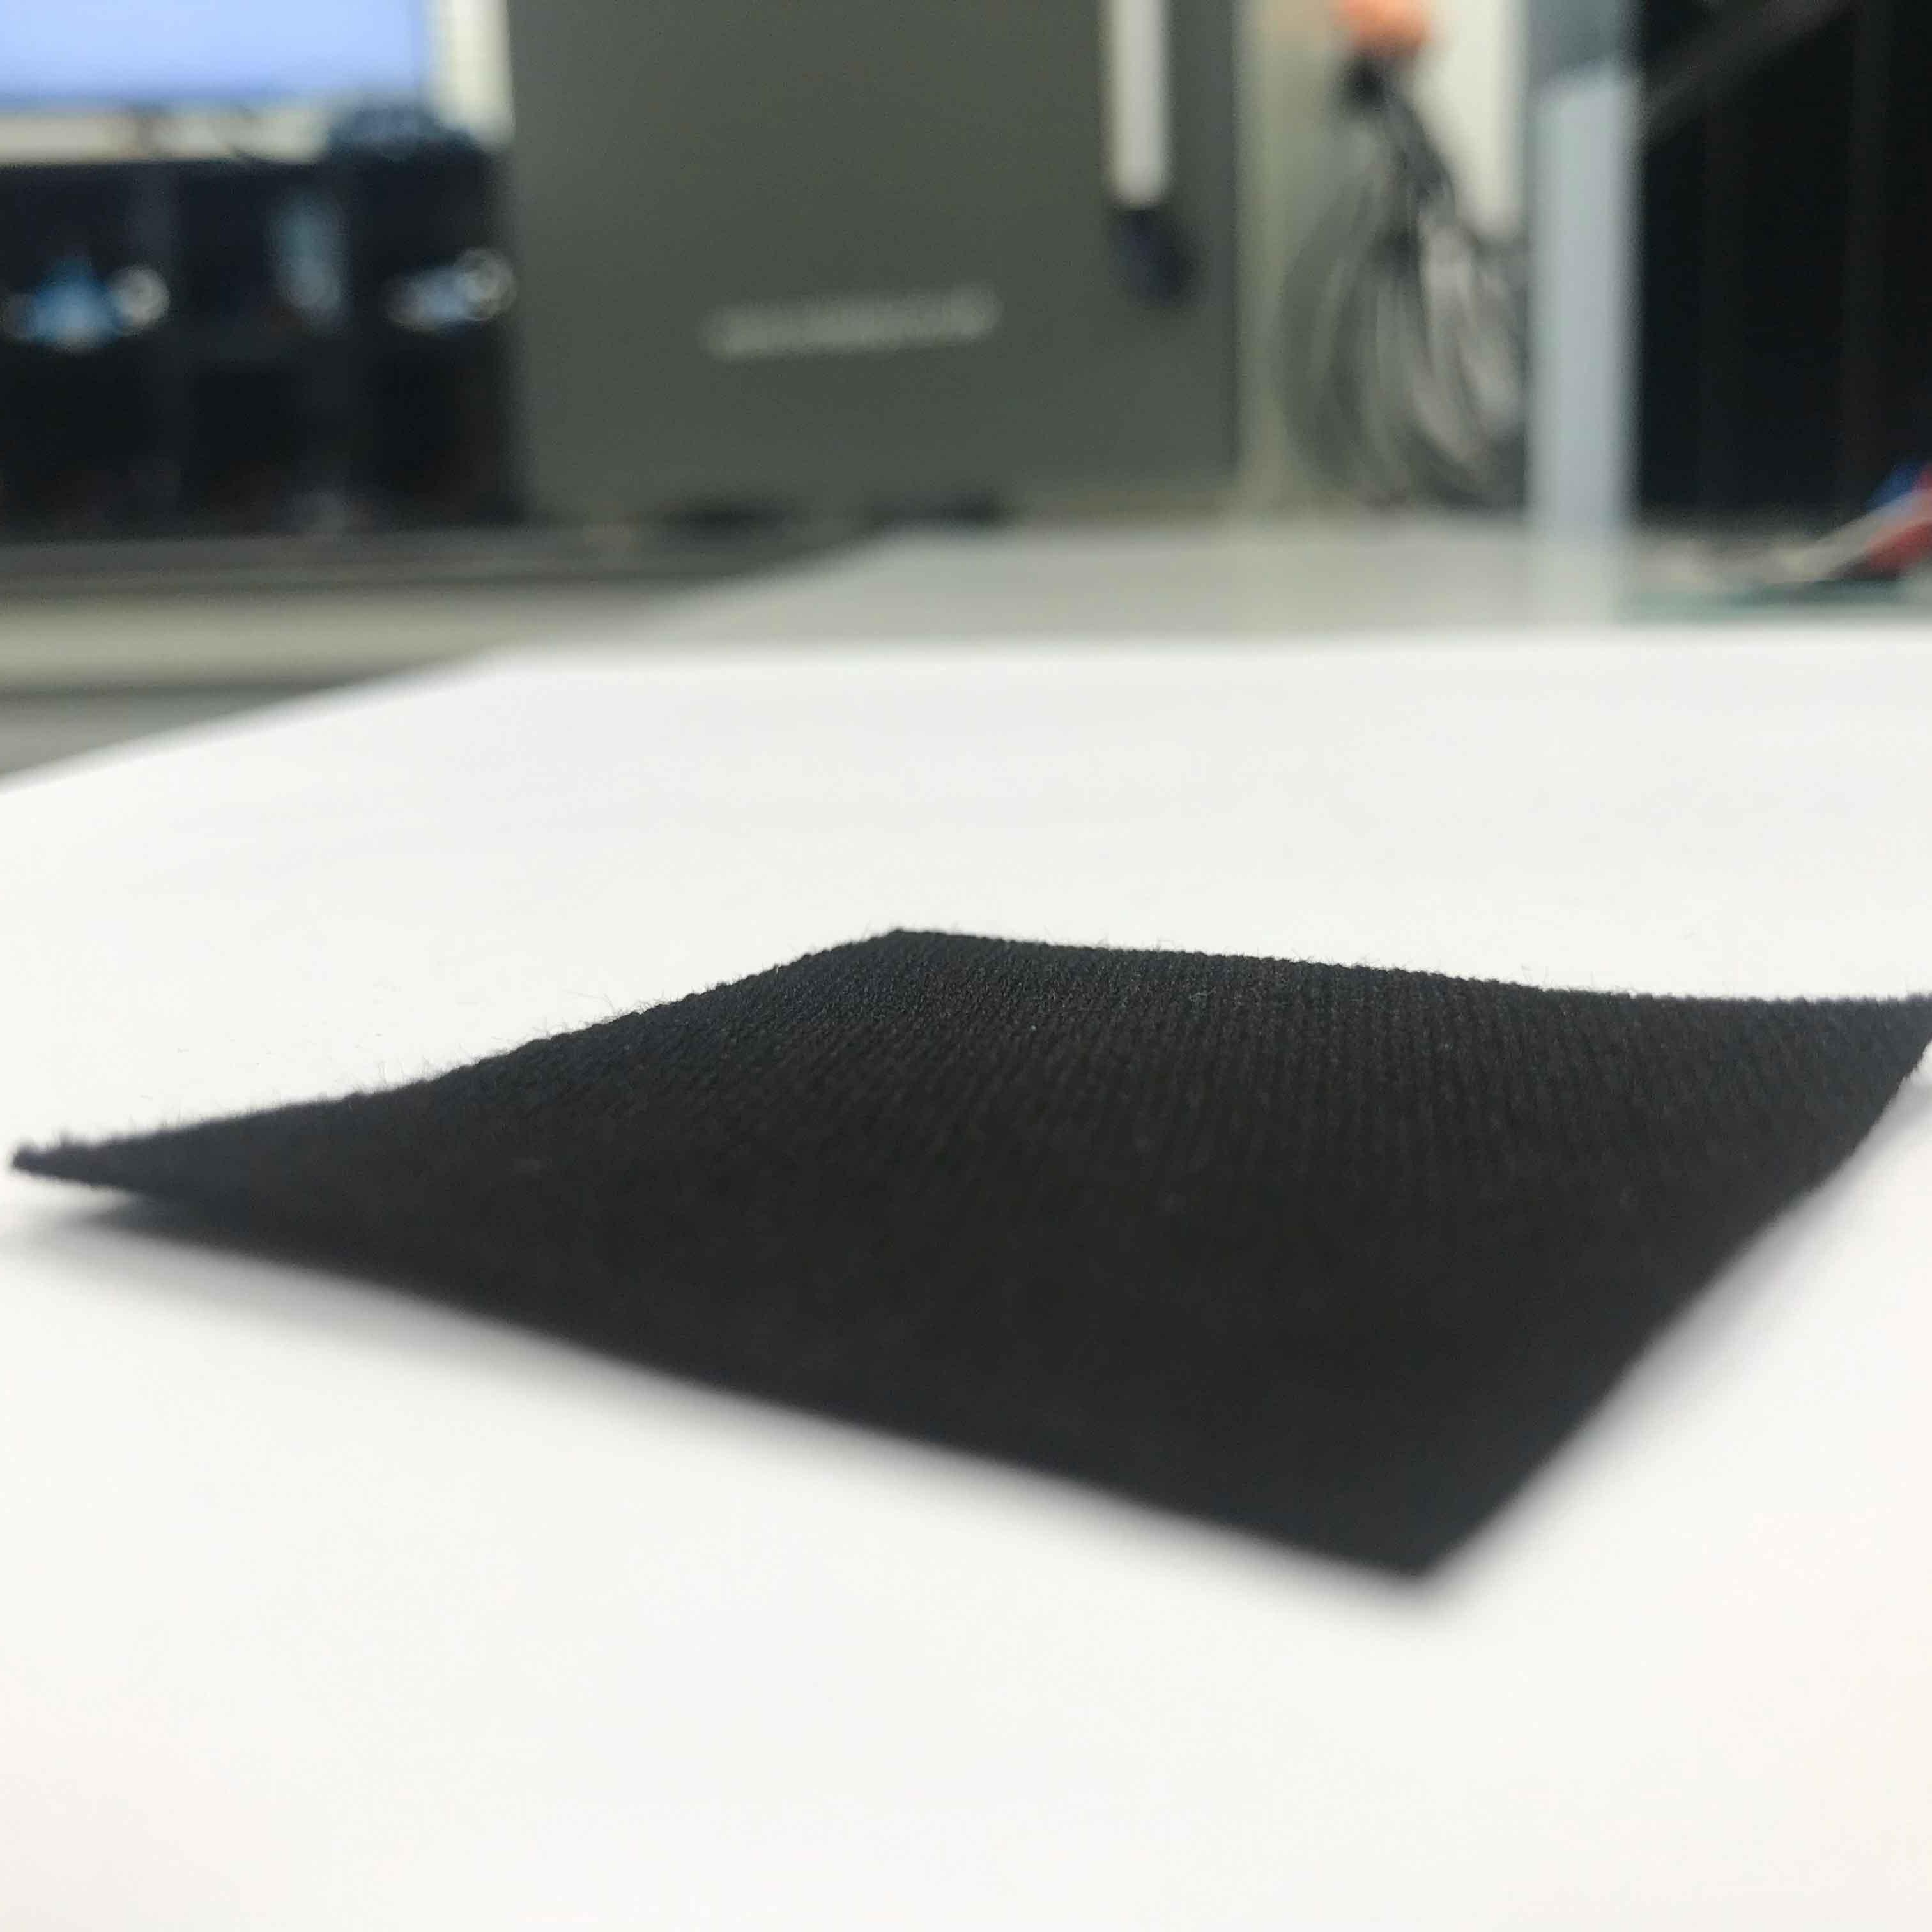 		A square, thin sheet of black carbon on a tabletop
	